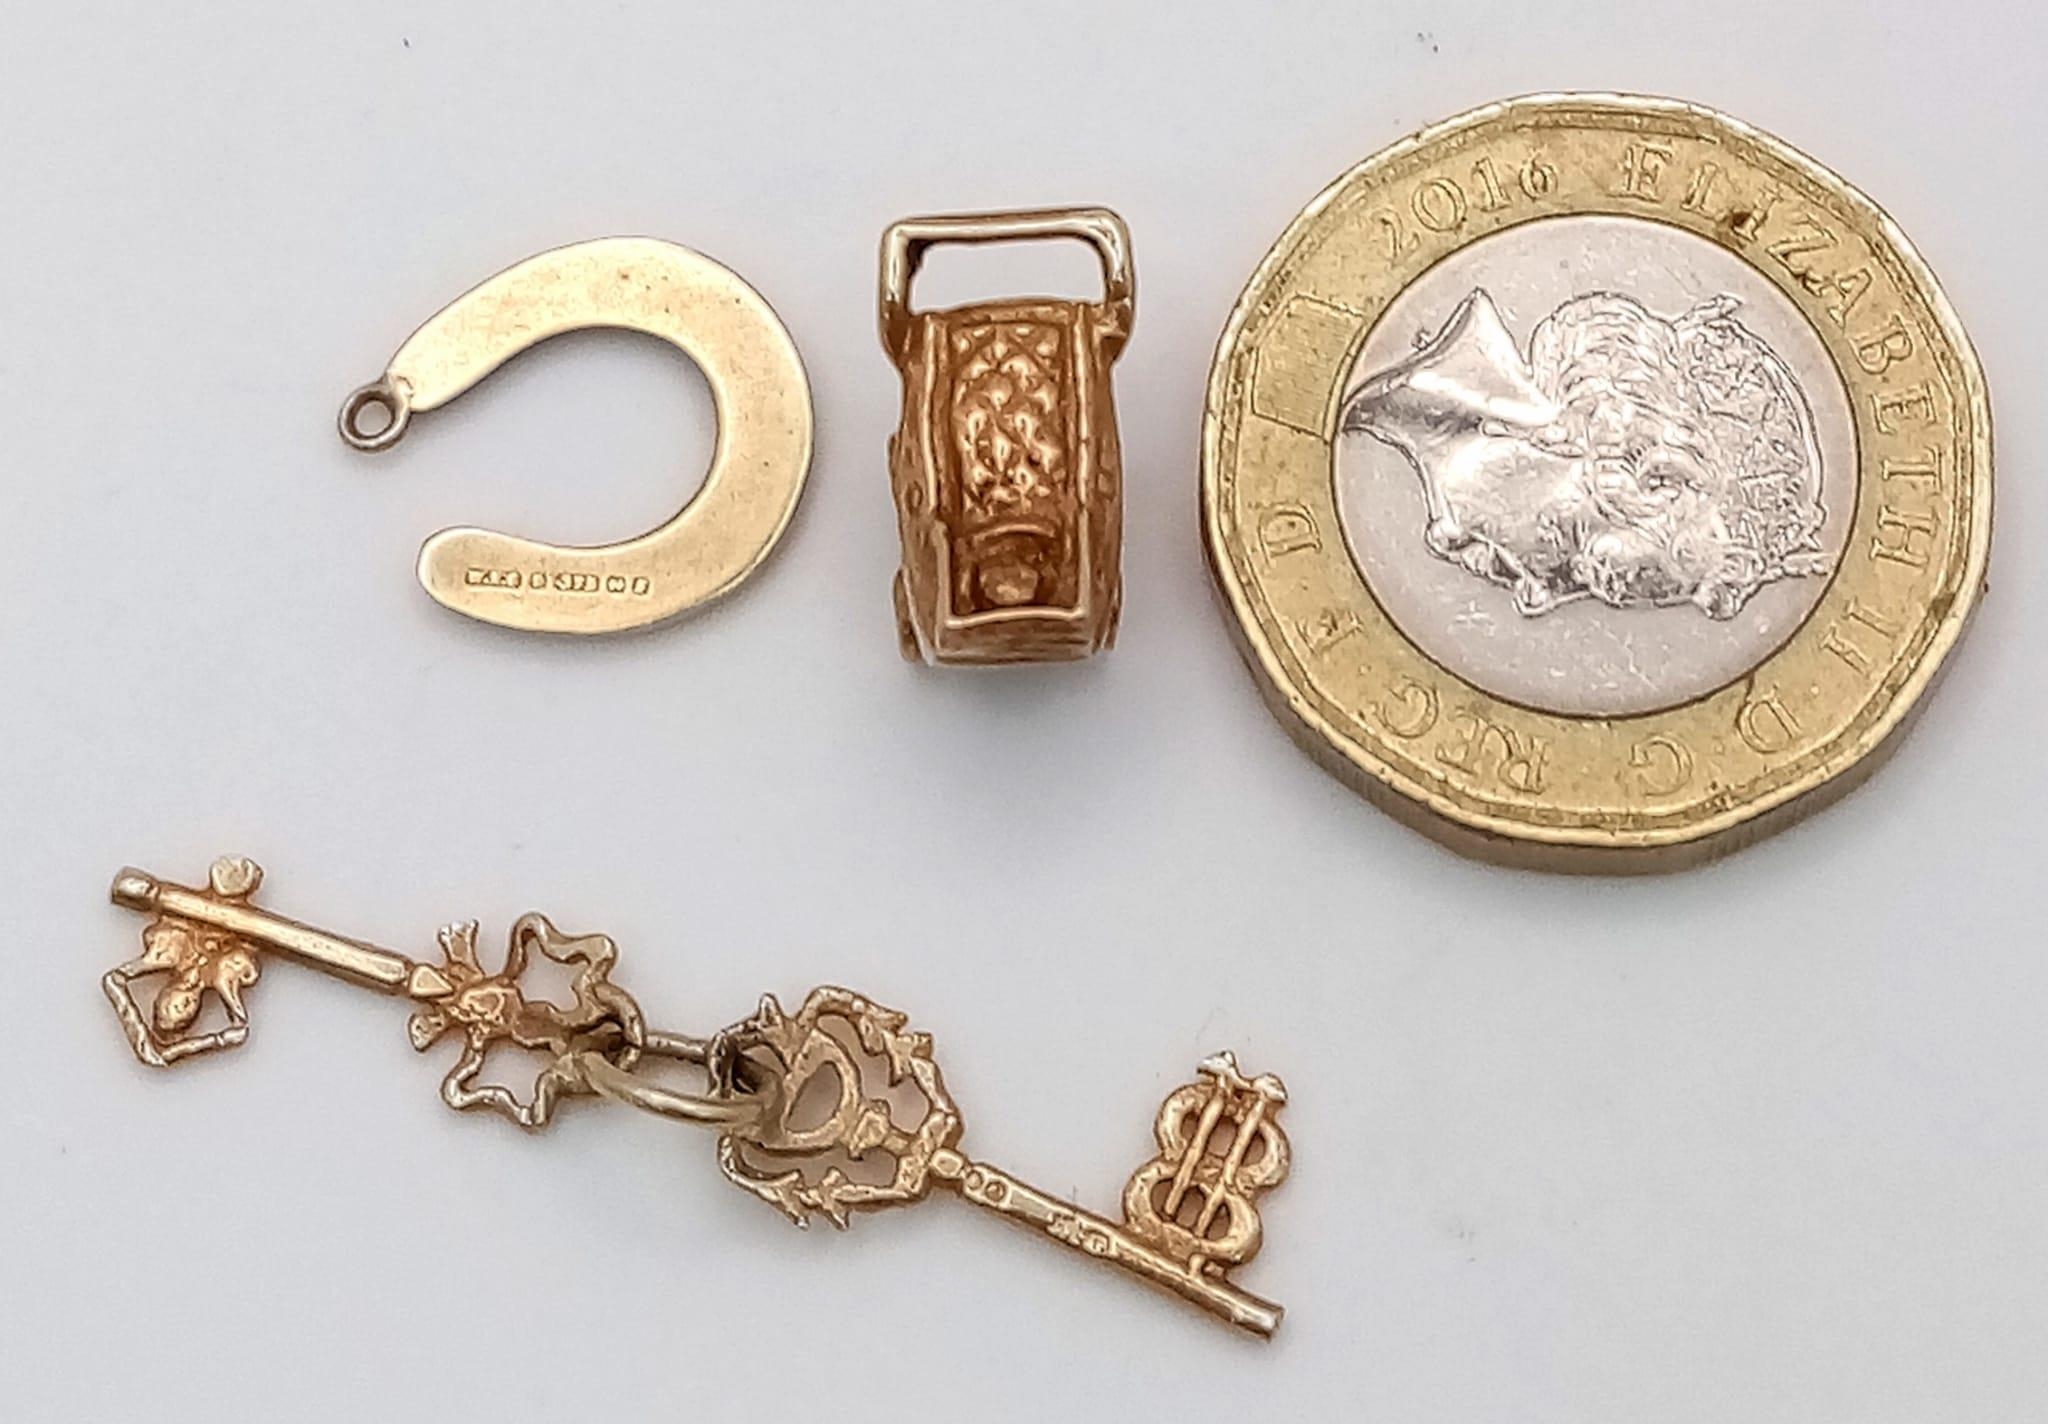 Three 9K Gold Pendants/ Charms - Pram, keys and lucky horseshoe! 2.76g total weight. - Image 4 of 4